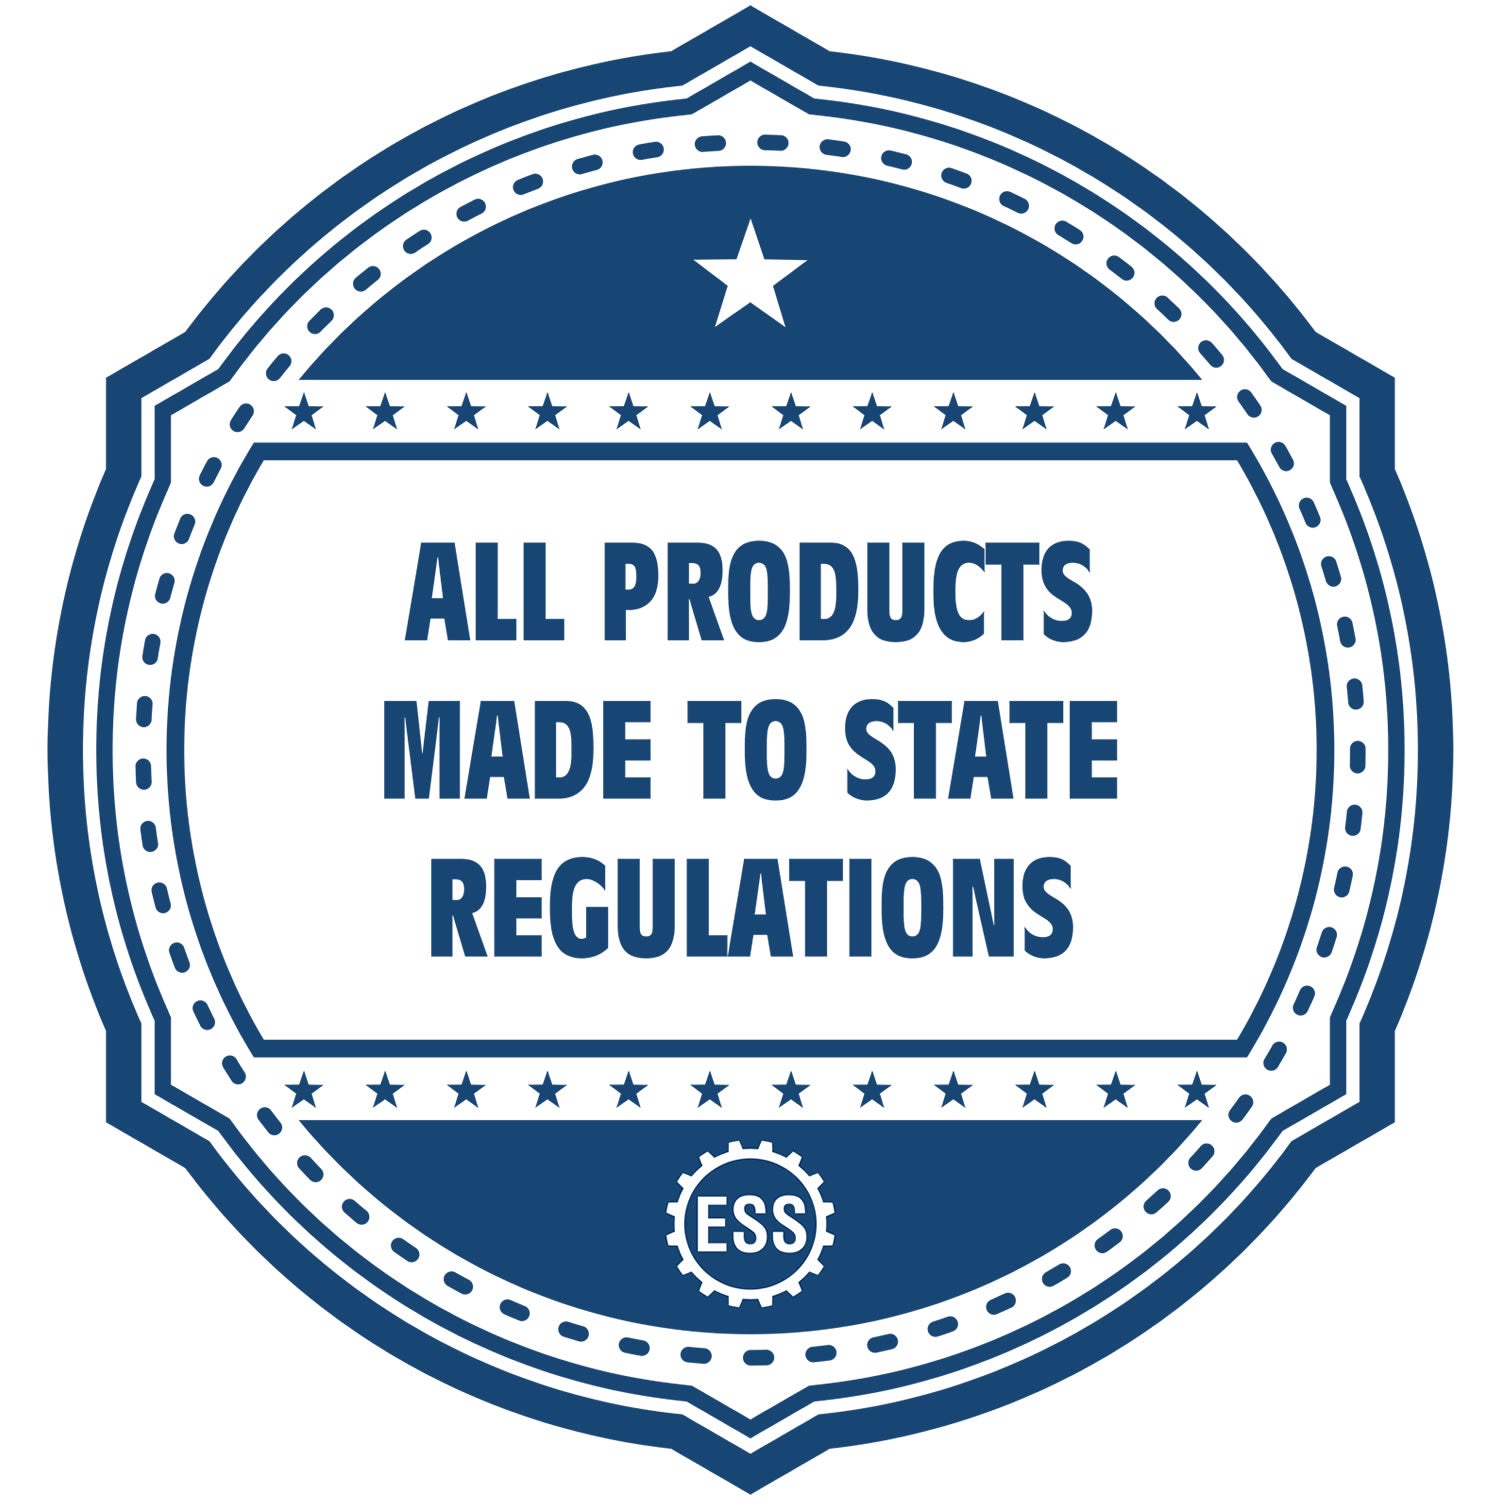 An icon or badge element for the Michigan Professional Engineer Seal Stamp showing that this product is made in compliance with state regulations.